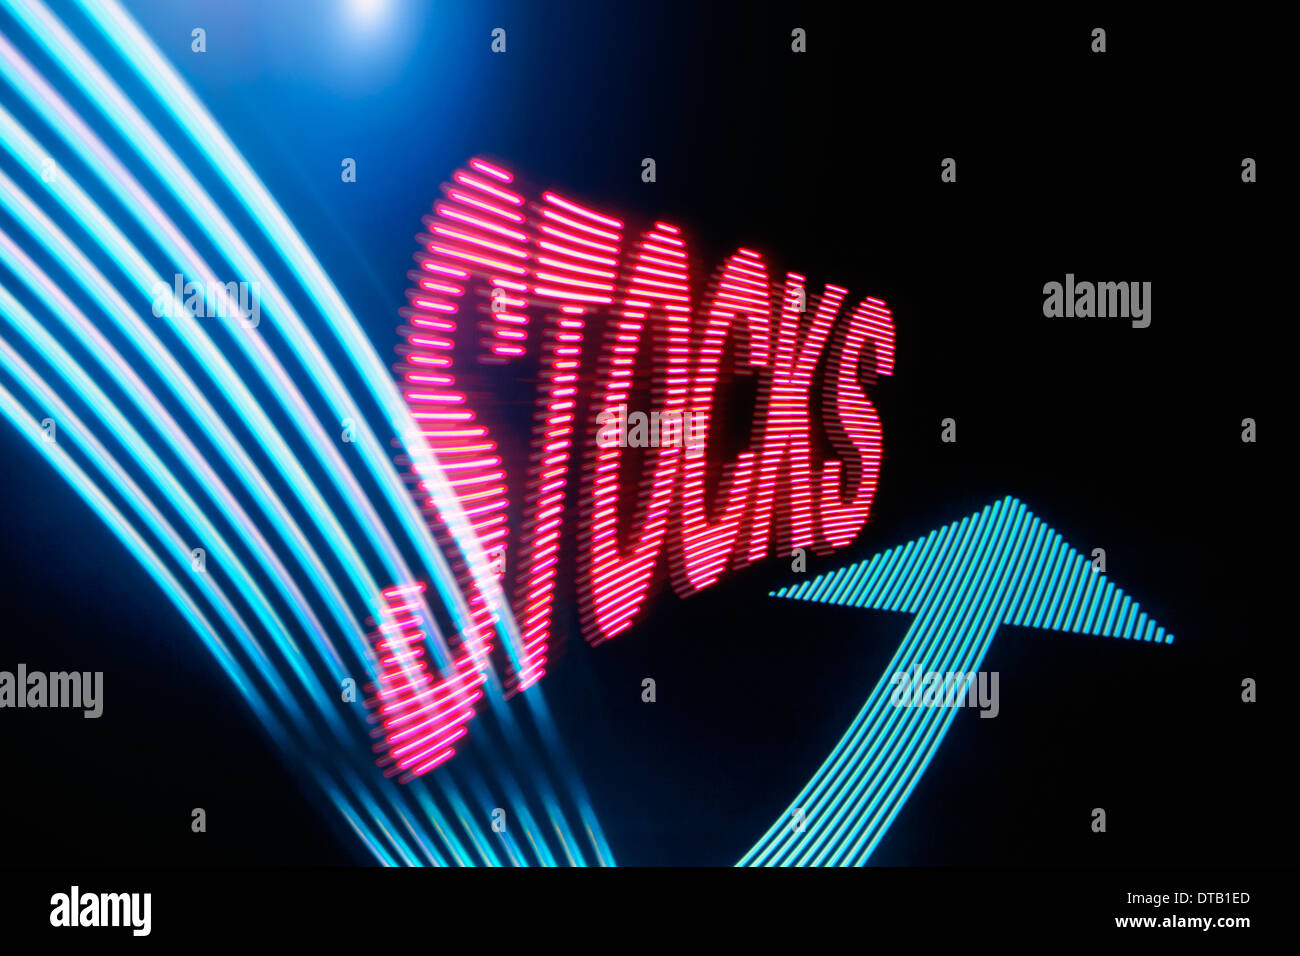 Arrow sign and text 'Stocks' with light effect Stock Photo